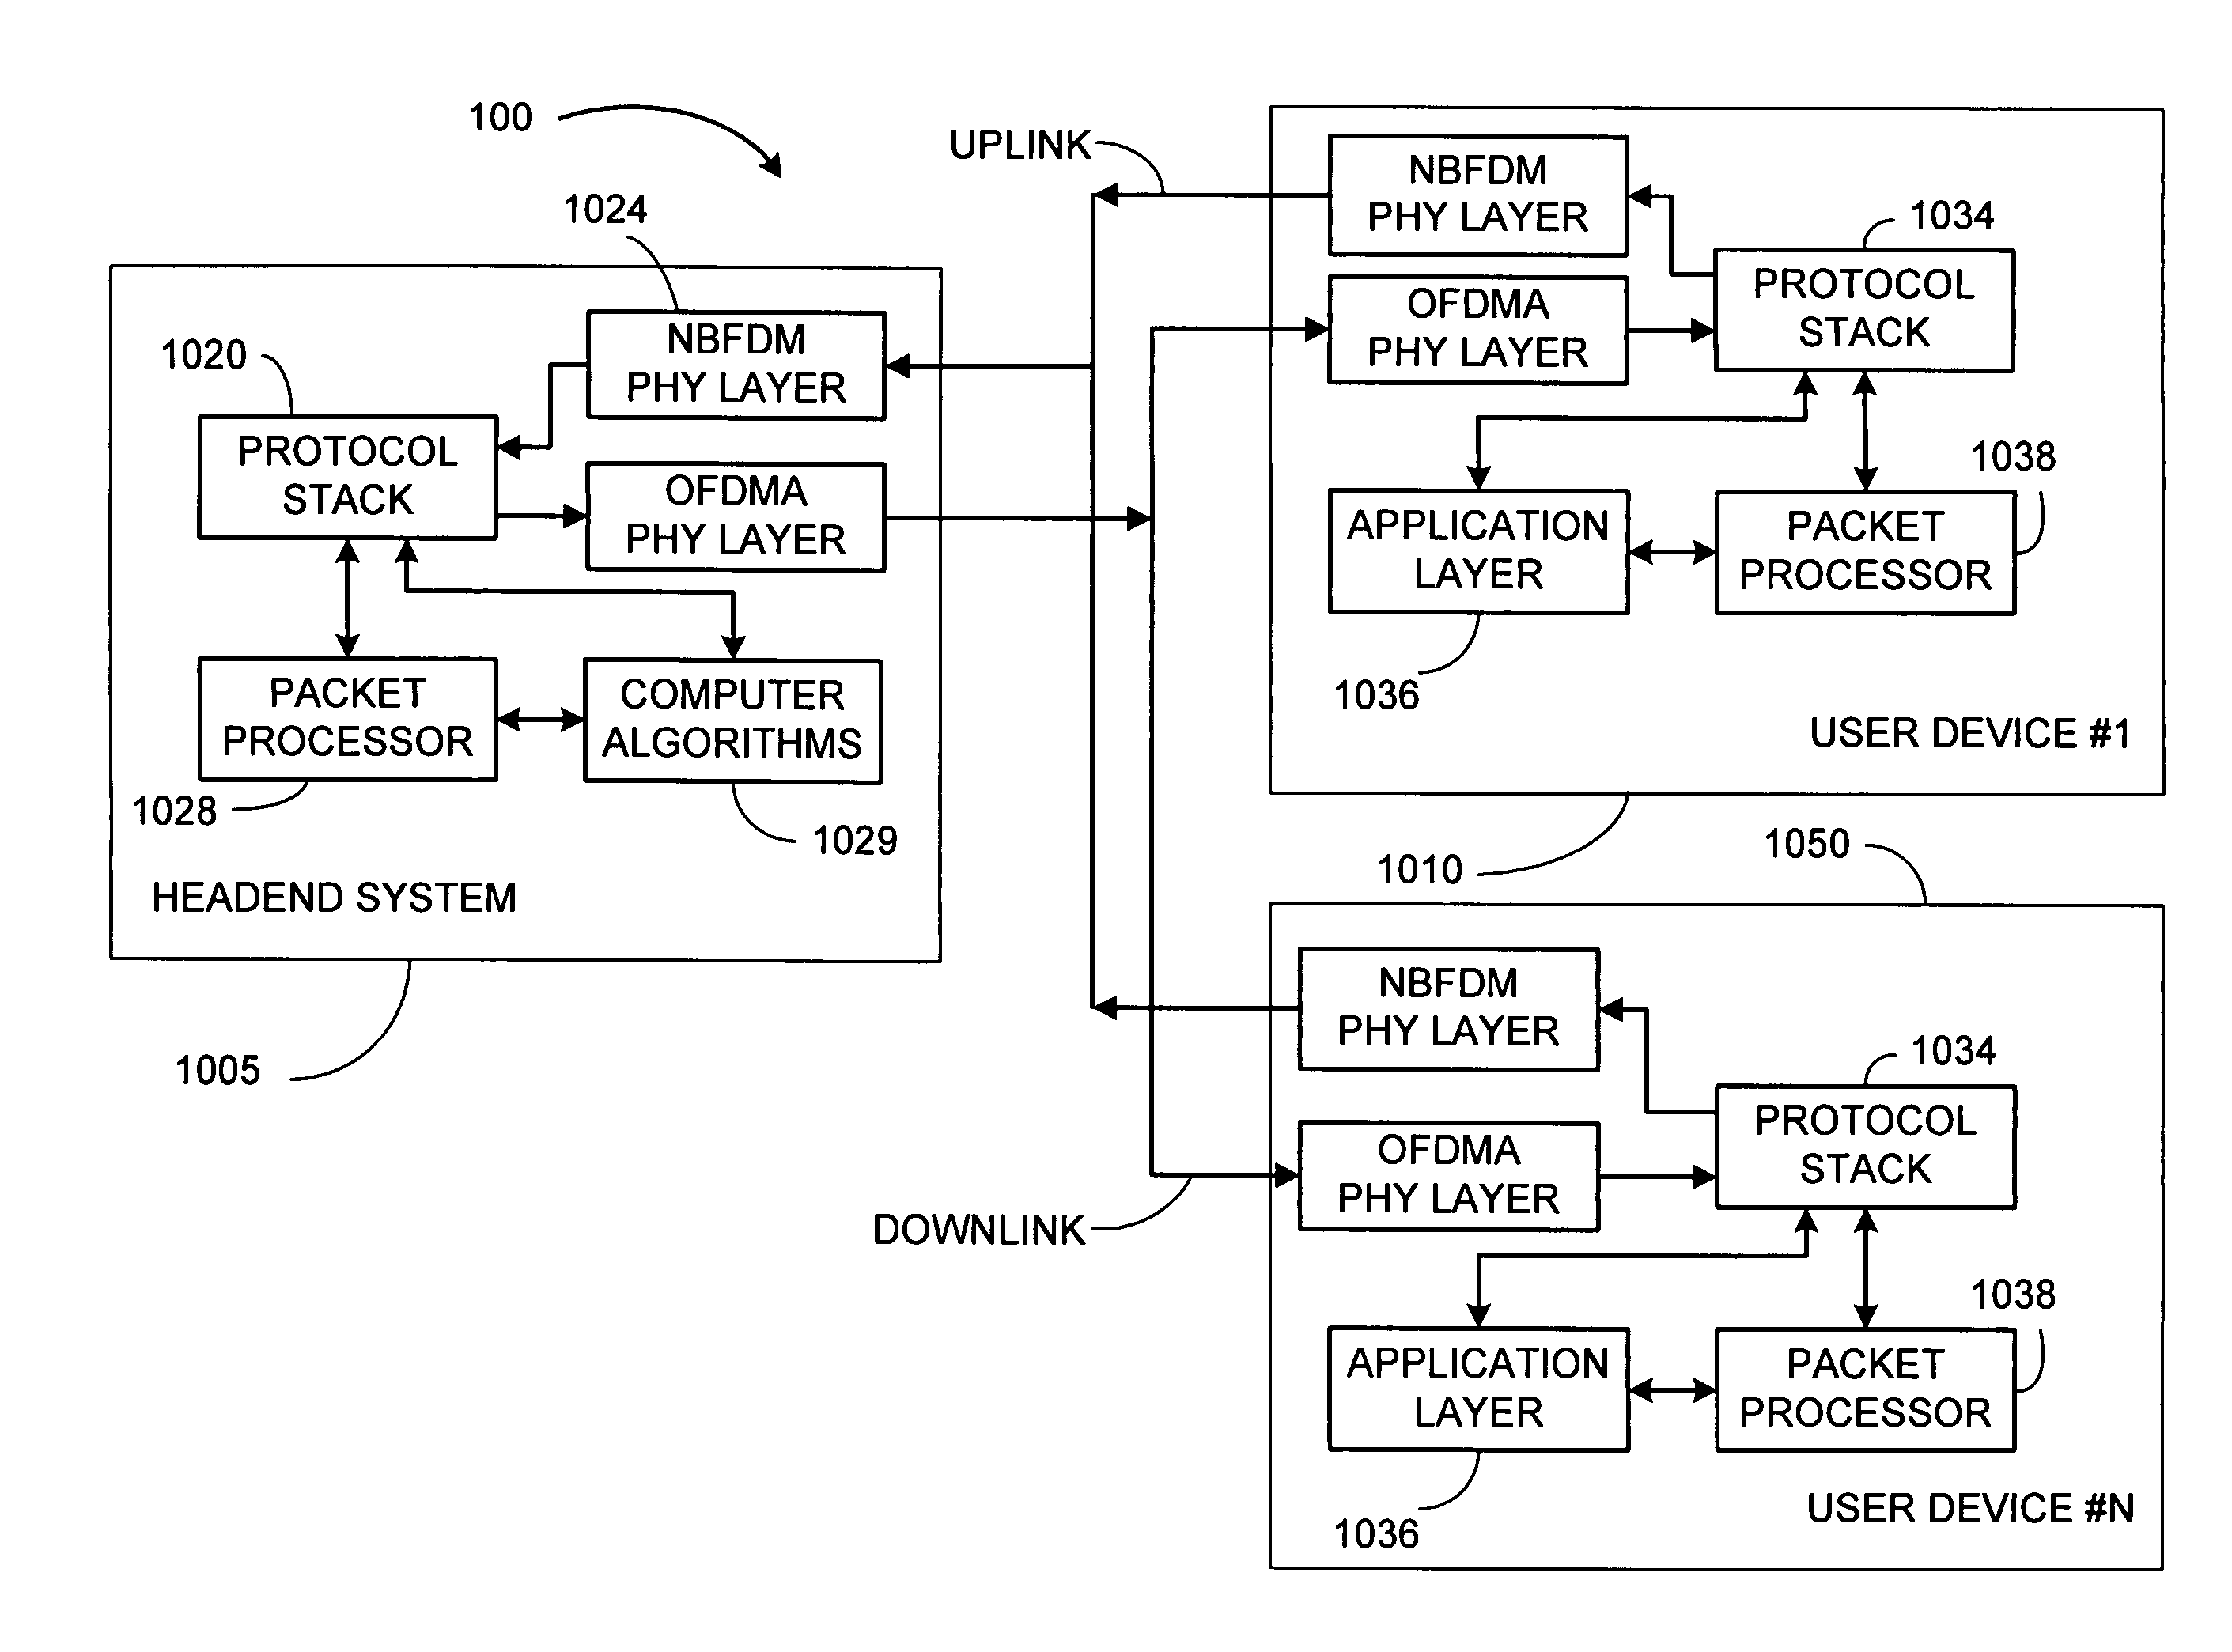 Uplink modulation and receiver structures for asymmetric OFDMA systems